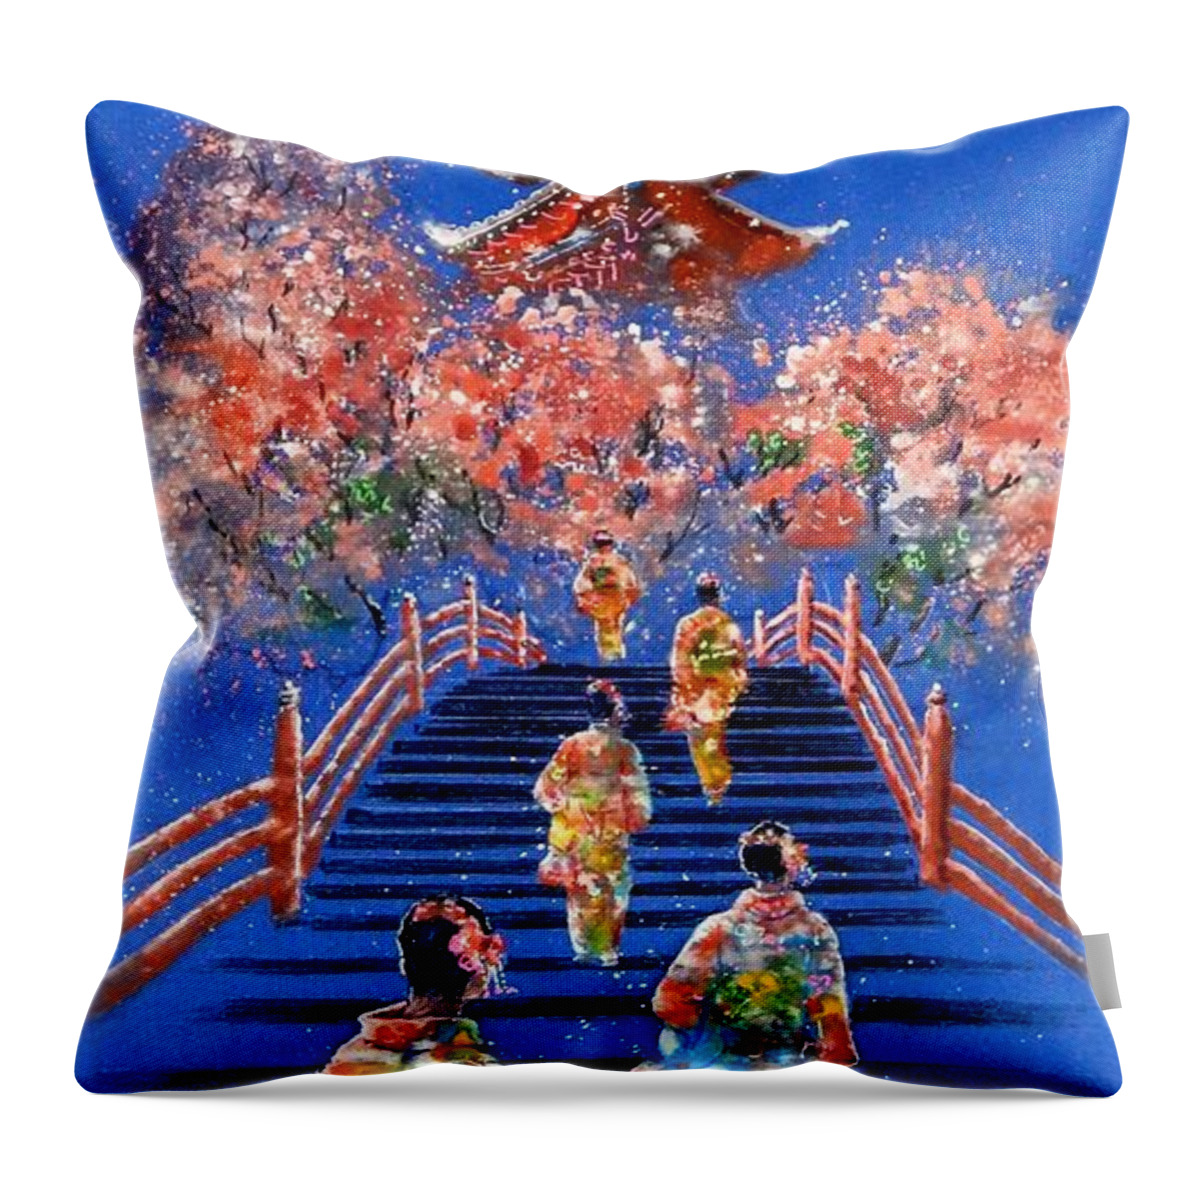 Cherry Blossoms Image Throw Pillow featuring the painting Cherry Blossom Festival Kyoto Japan by John YATO